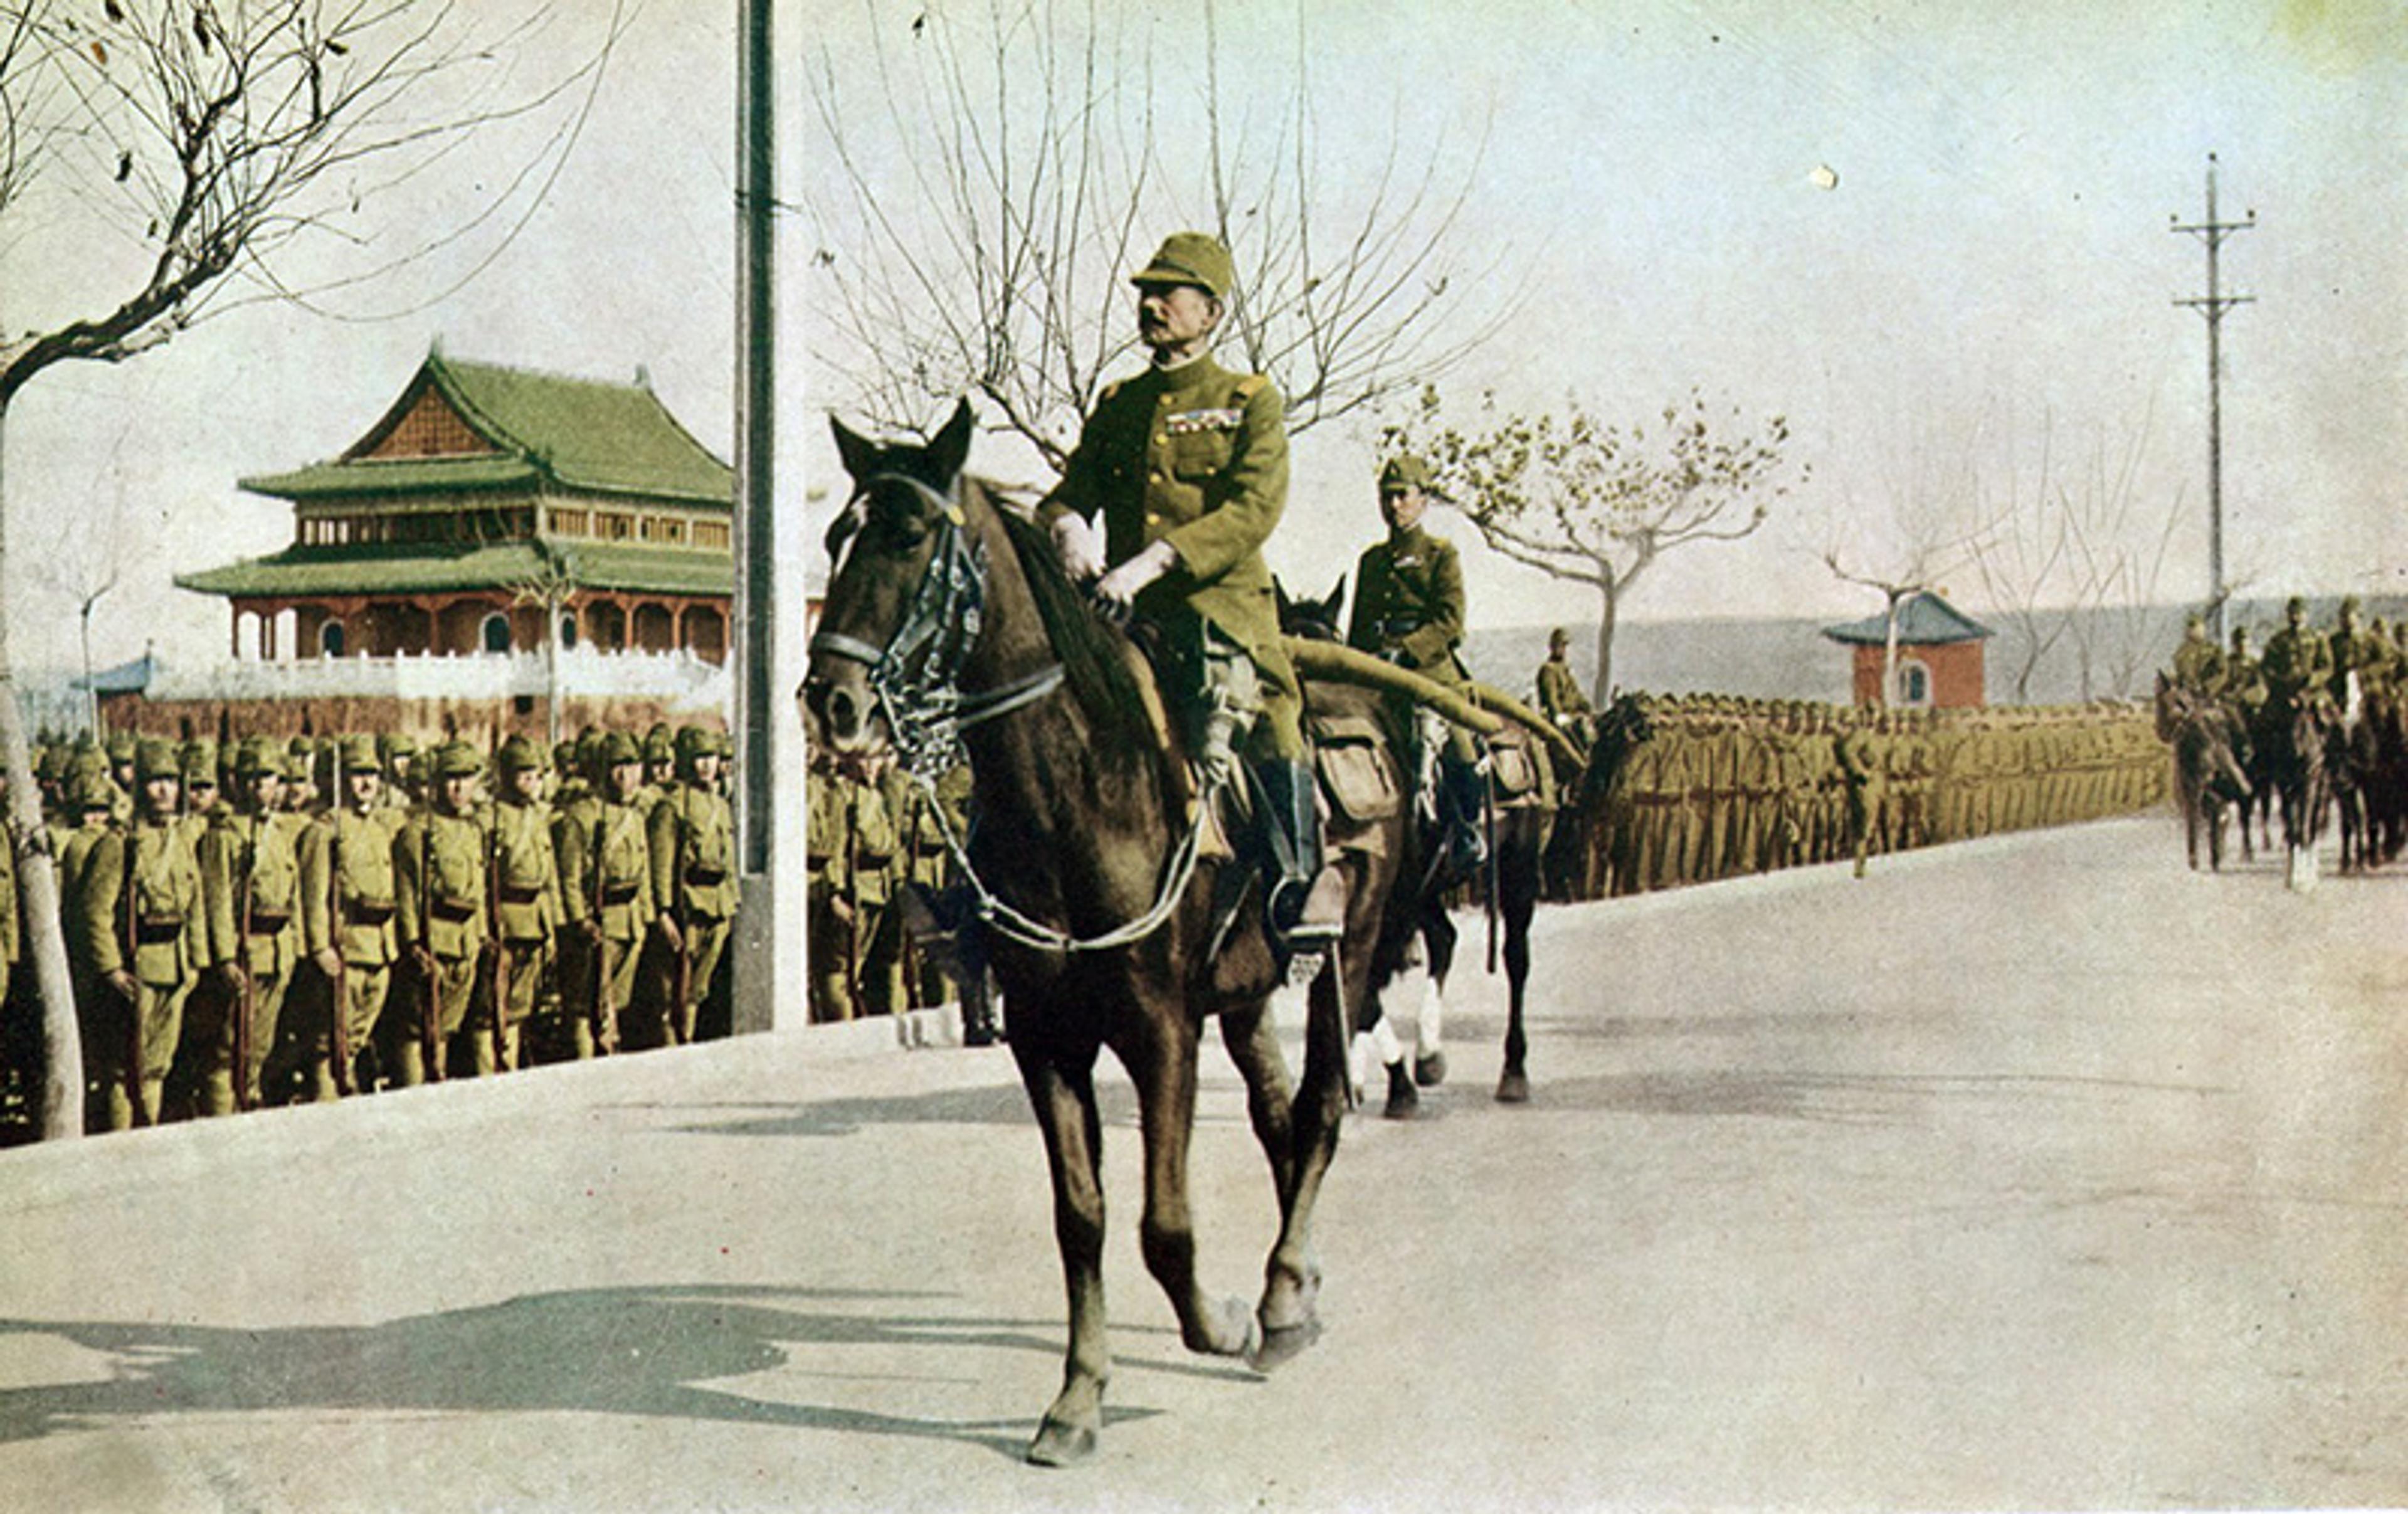 Soldiers in uniform march in formation with trees and telegraph poles visible. In the foreground, a soldier on horseback leads the procession. A traditional building with a green, ornate roof is in the background, suggesting an Asian setting. The scene appears to be historical, possibly early 20th century.